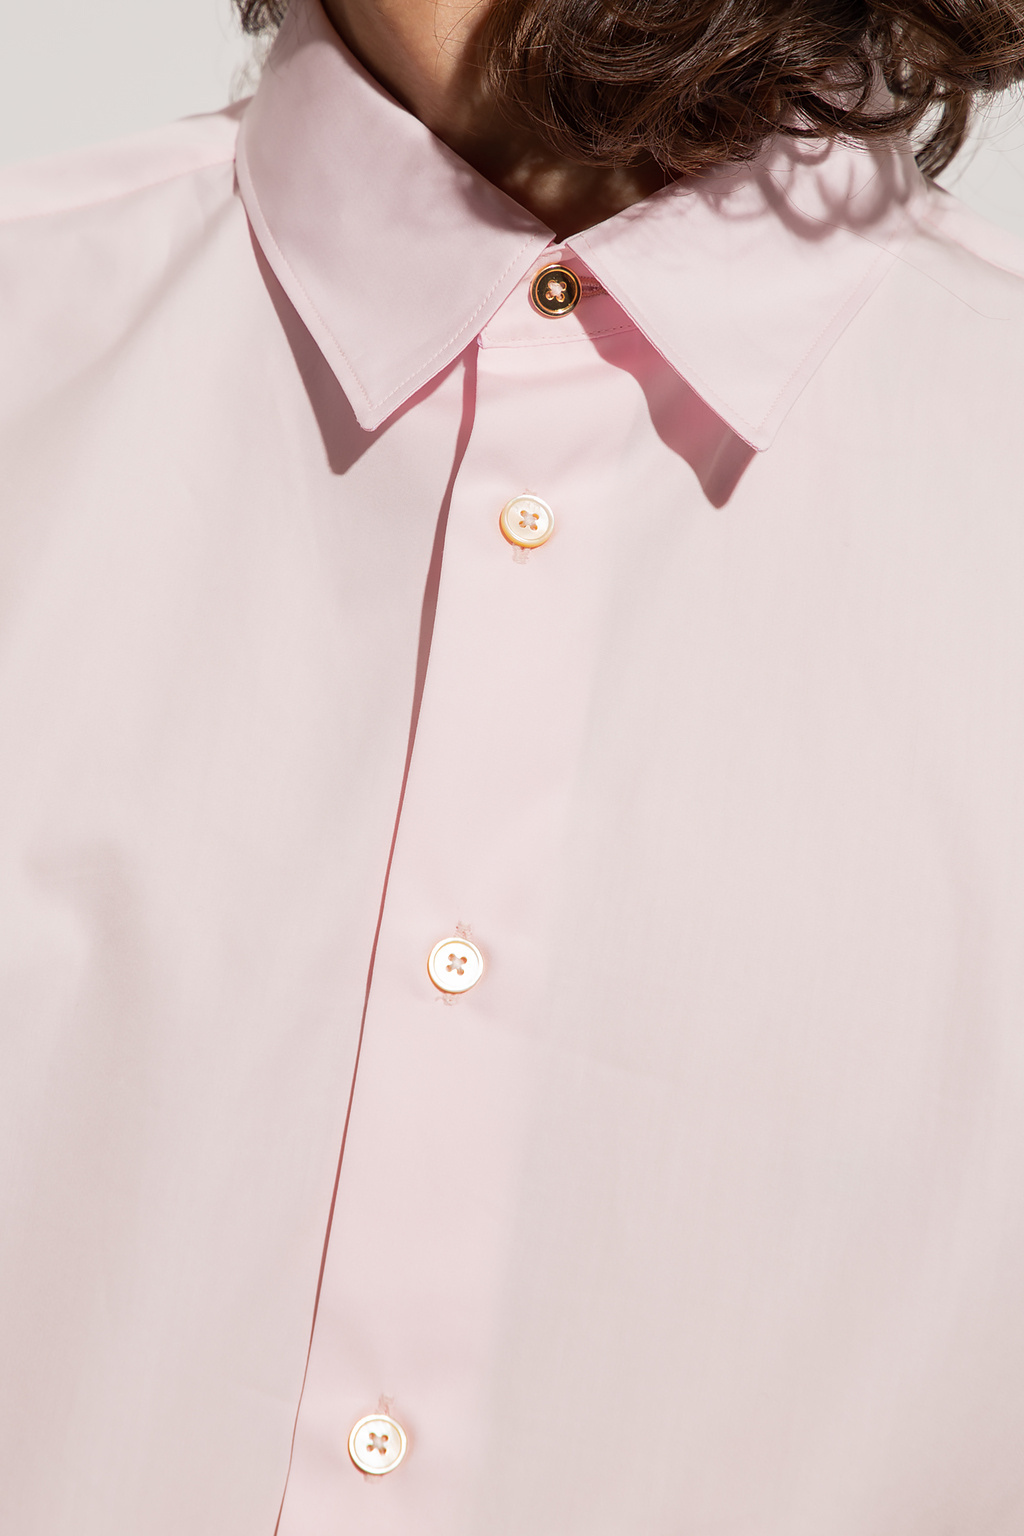 Paul Smith Project shirt